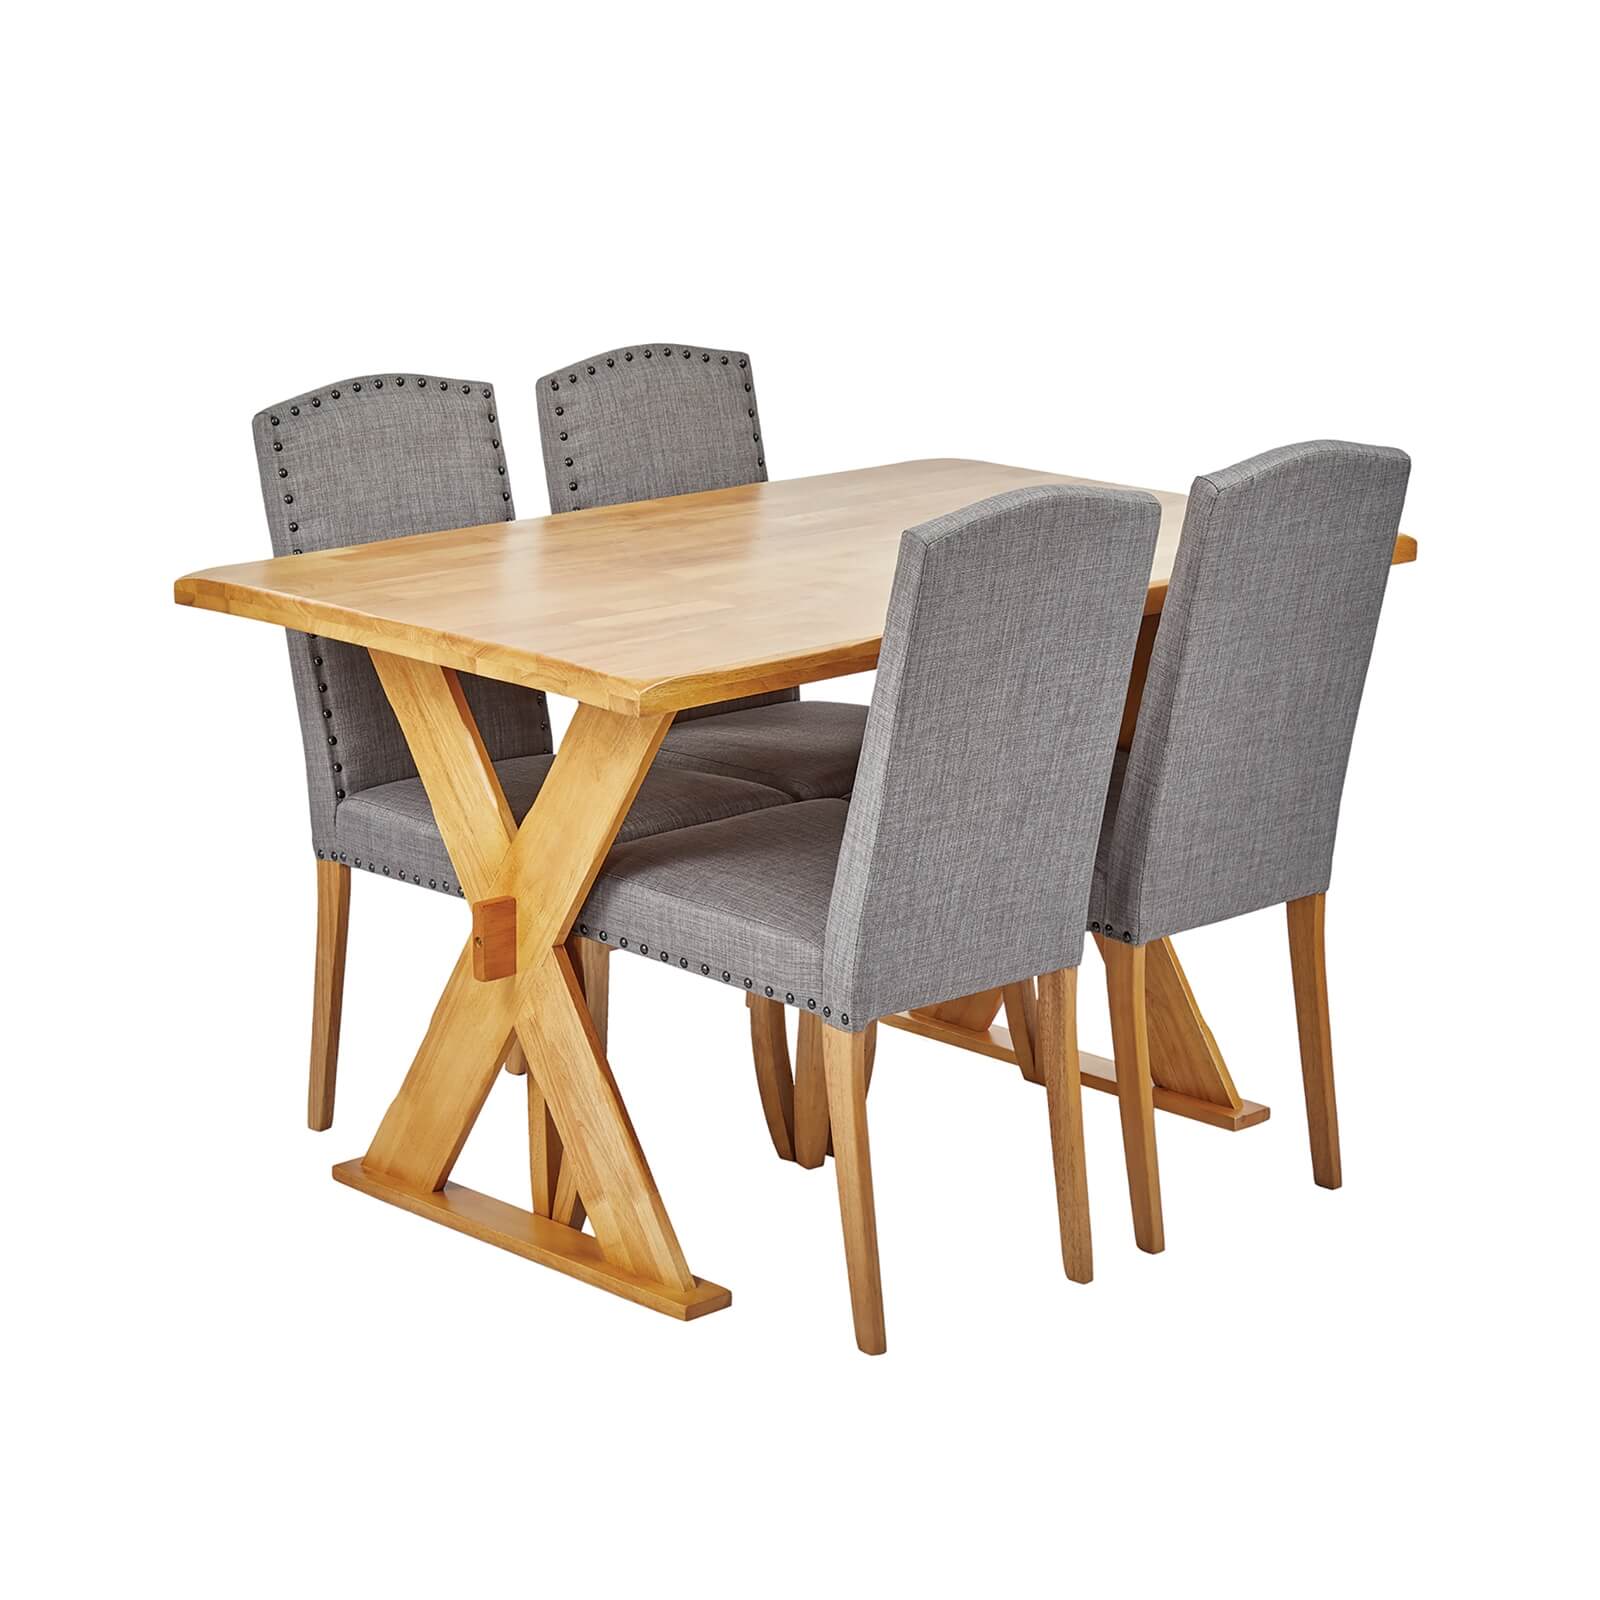 Seville 4 Seater Dining Set - Evesham Dining Chairs - Grey